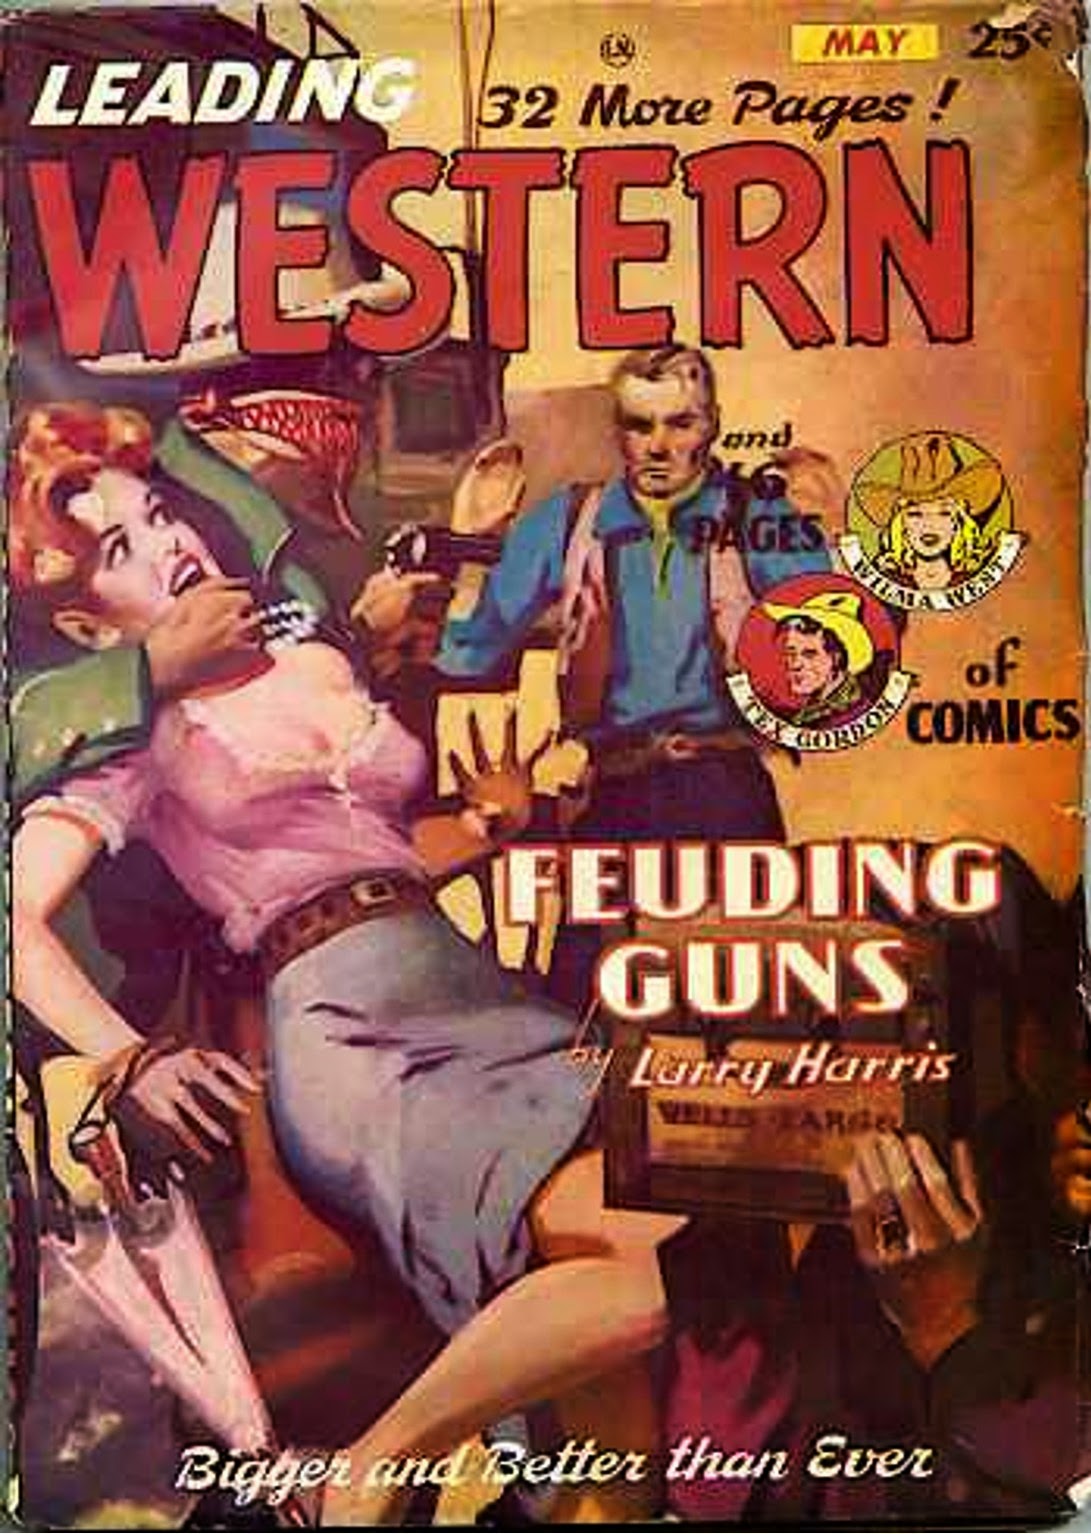 Western Novels and Short Stories Pulp August 1952- Louis L'amour